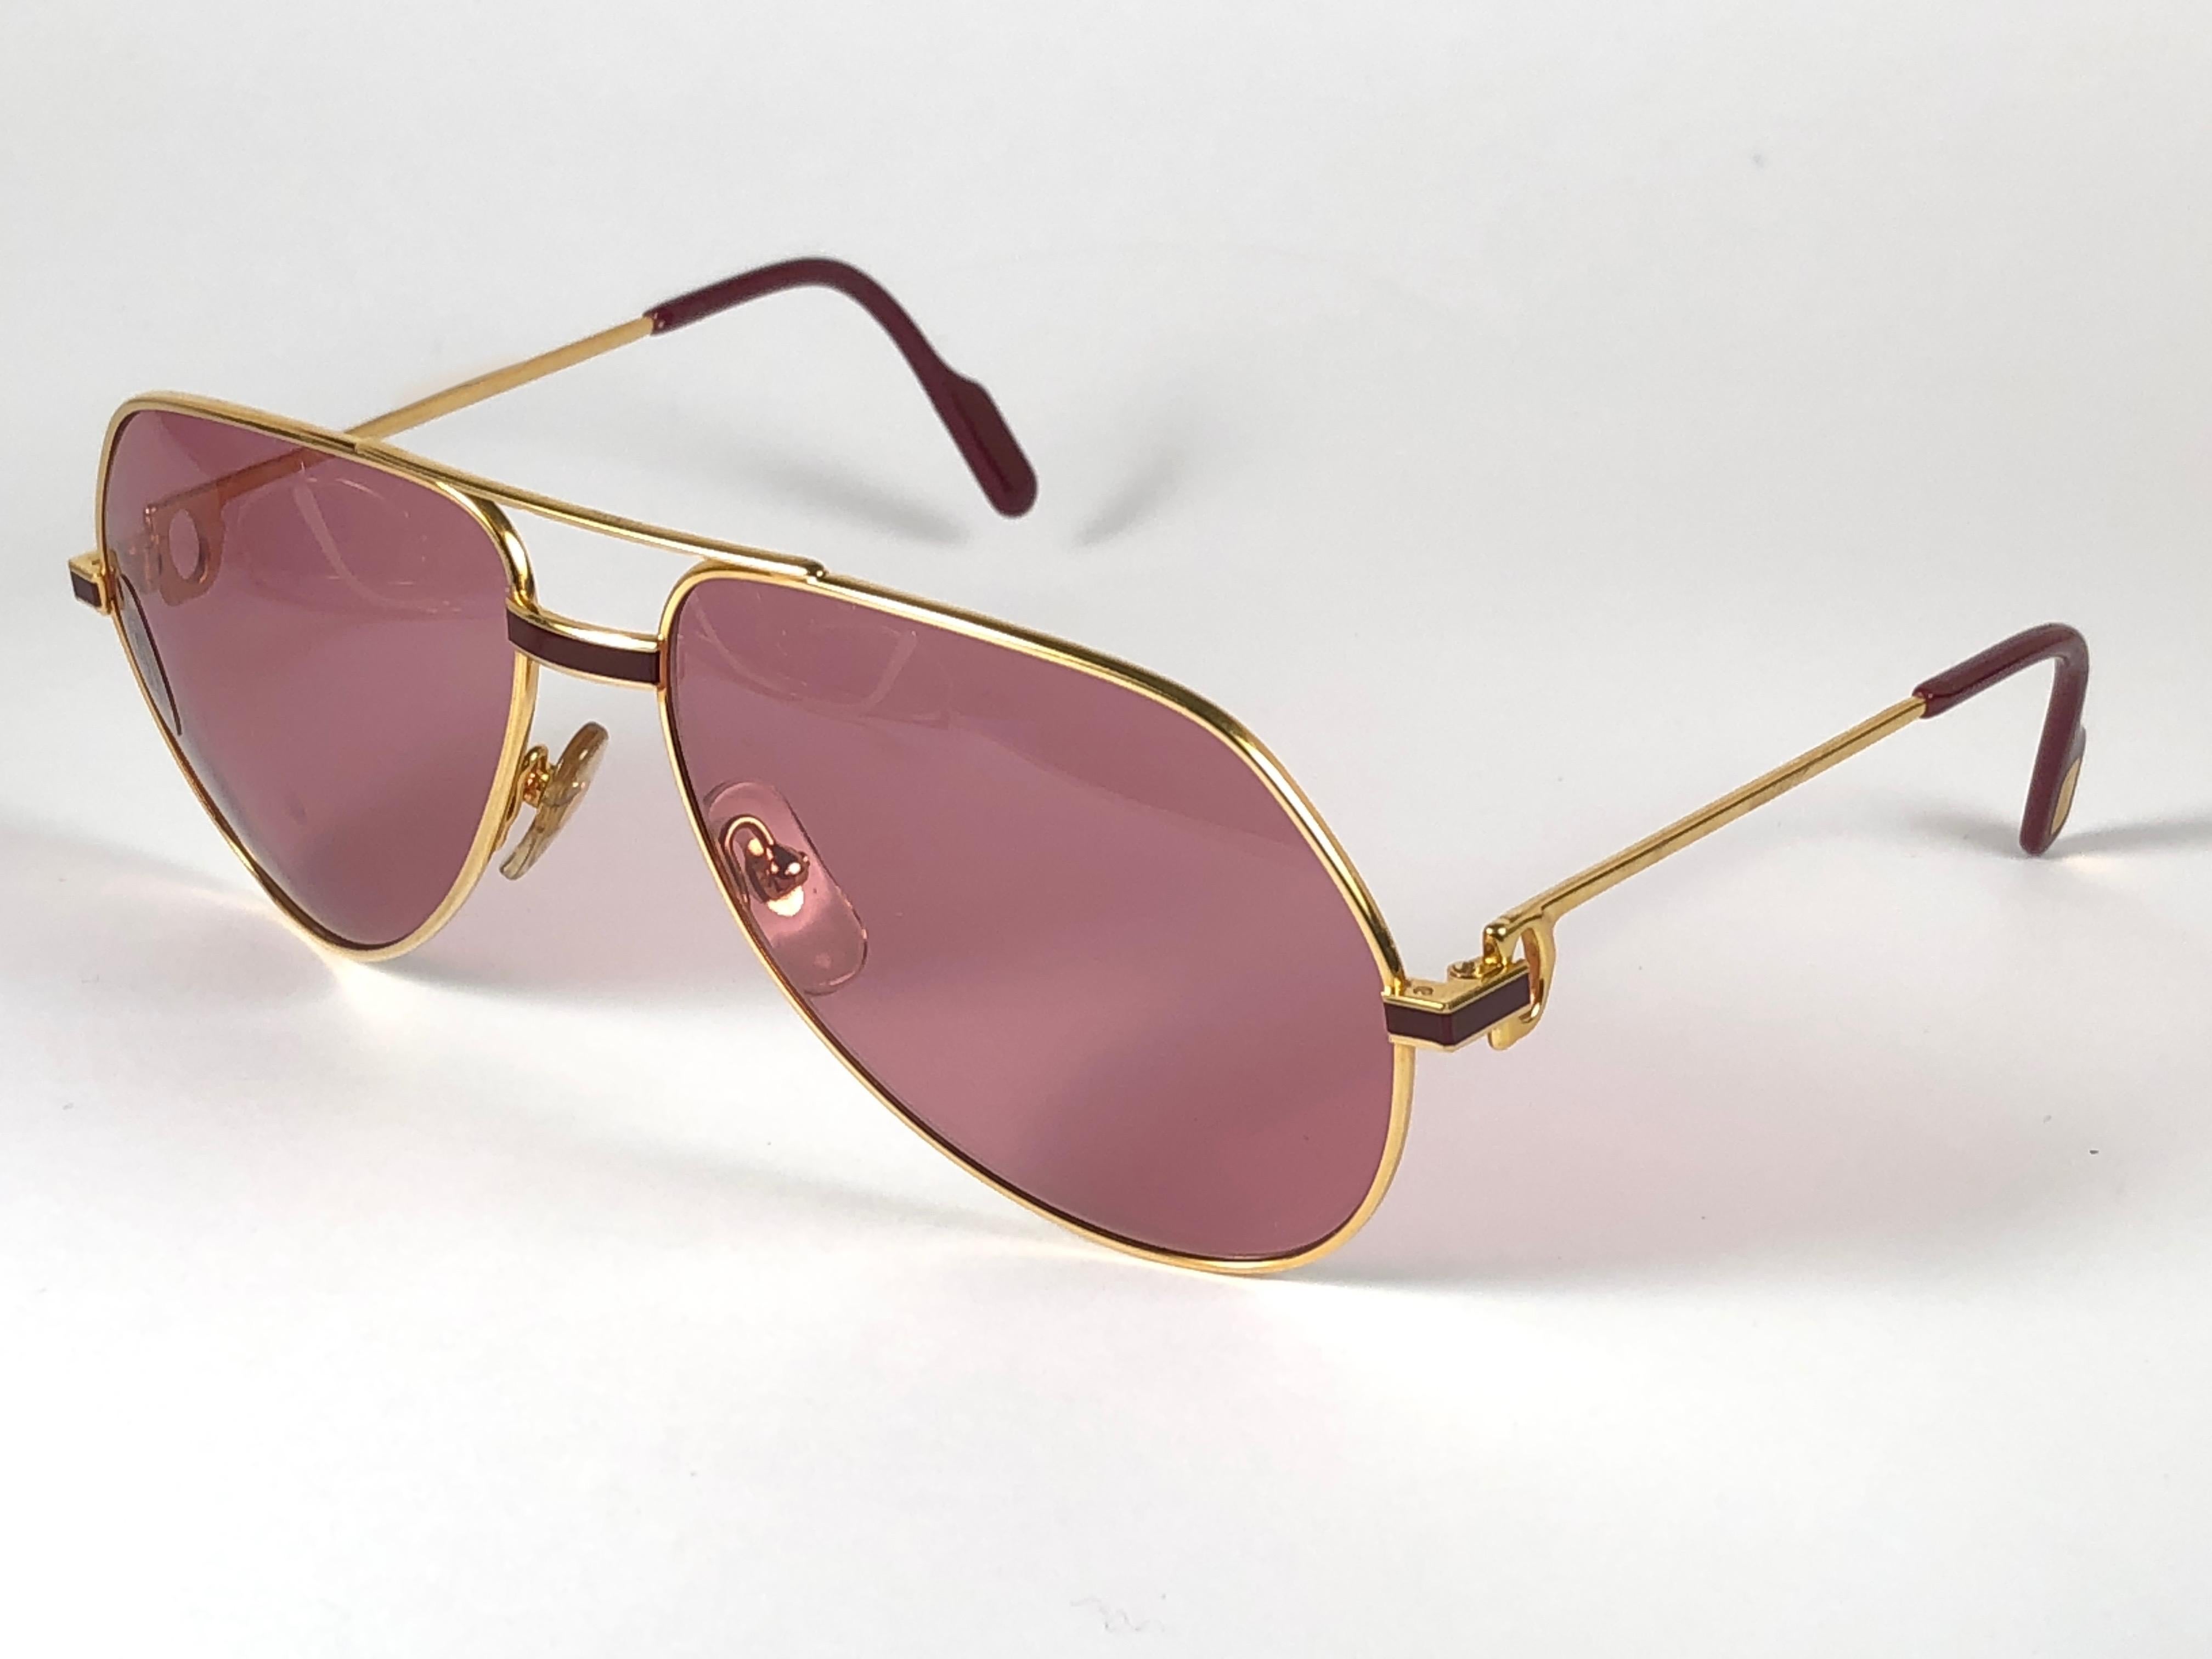 Cartier Laque de Chine Aviator Gold 59Mm Heavy Plated Sunglasses France 2